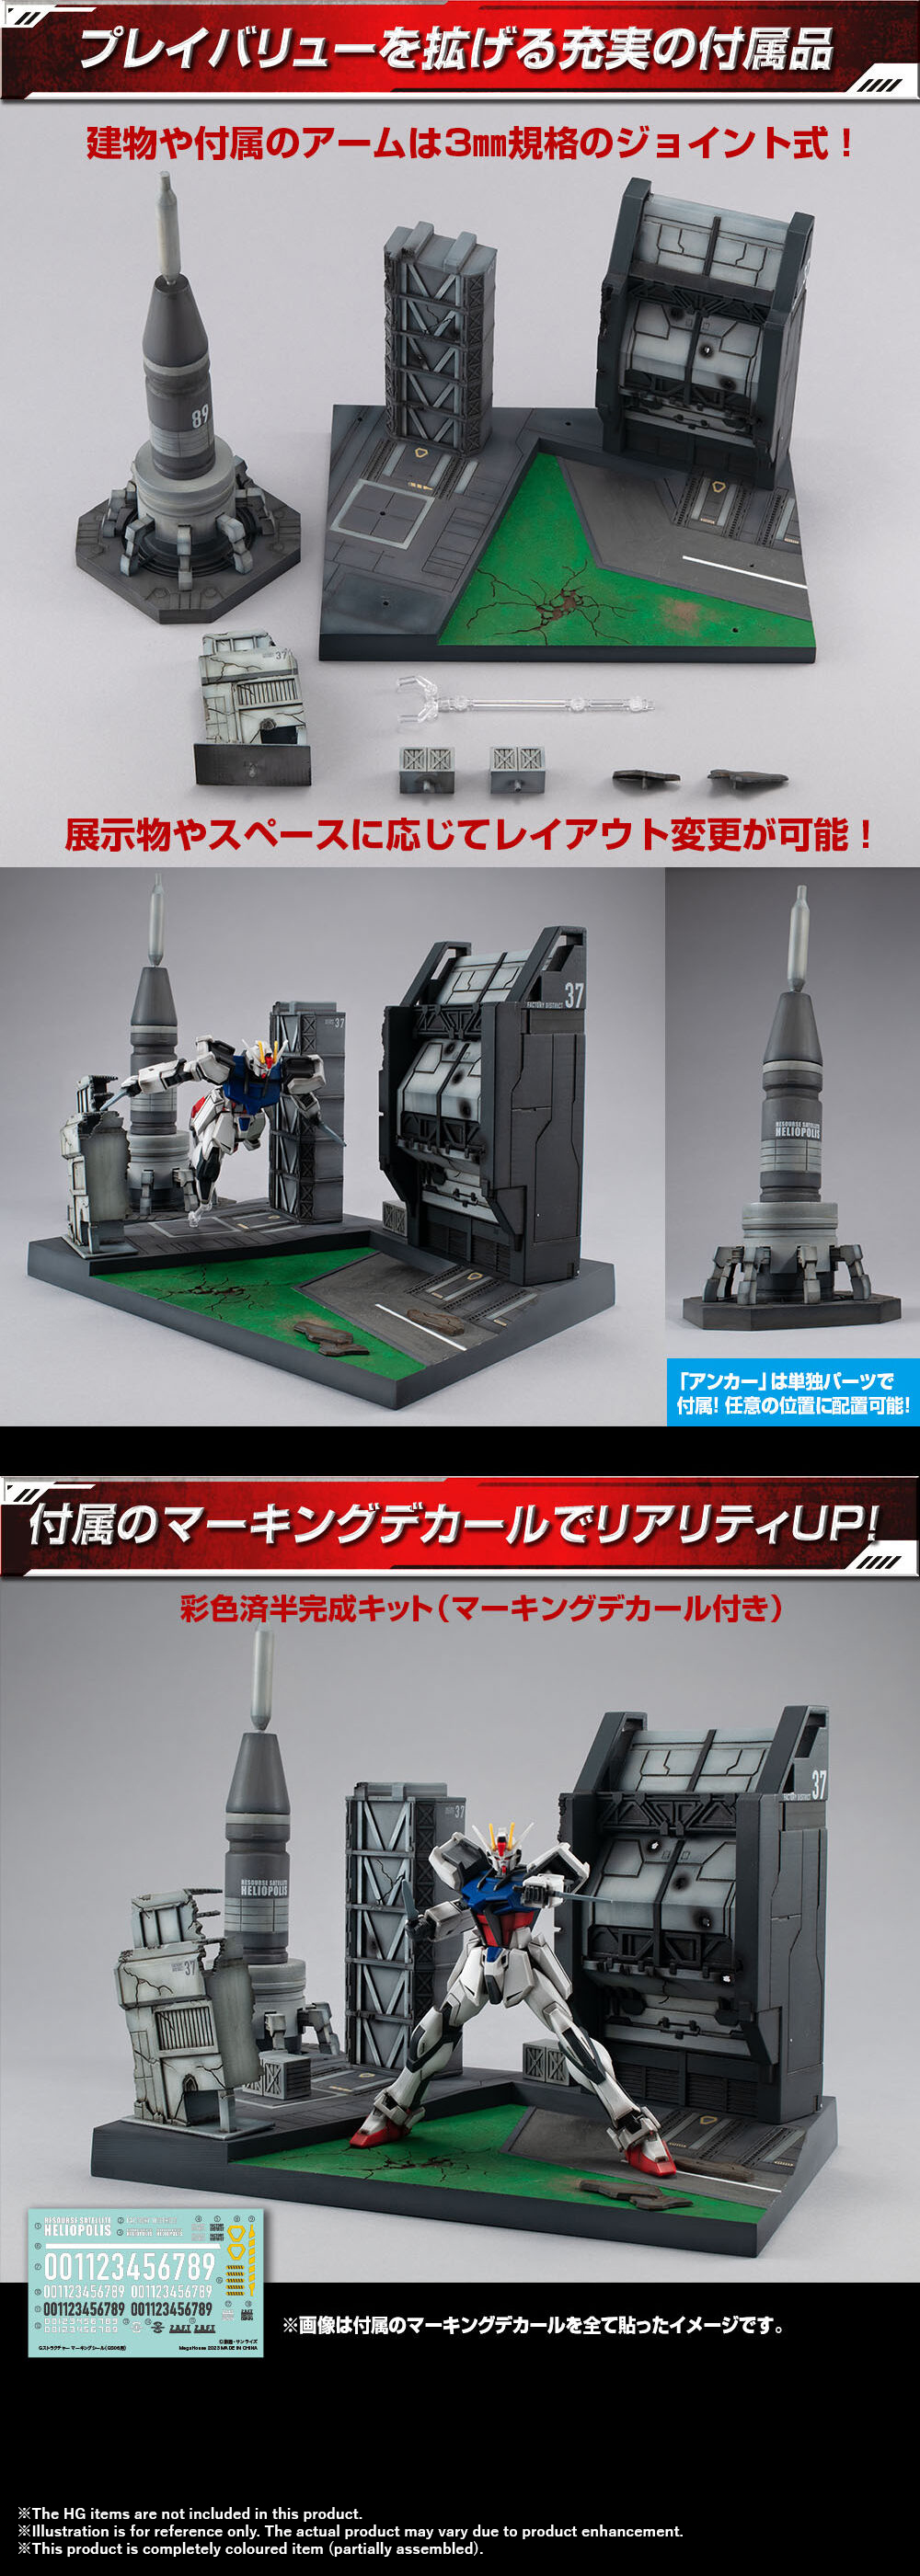 REALISTIC MODEL SERIES MOBILE SUITS GUNDAM SEED (1/144 HG SERIES) G STRUCTURE [GS06] HELIOPOLIS BATTLE STAGE